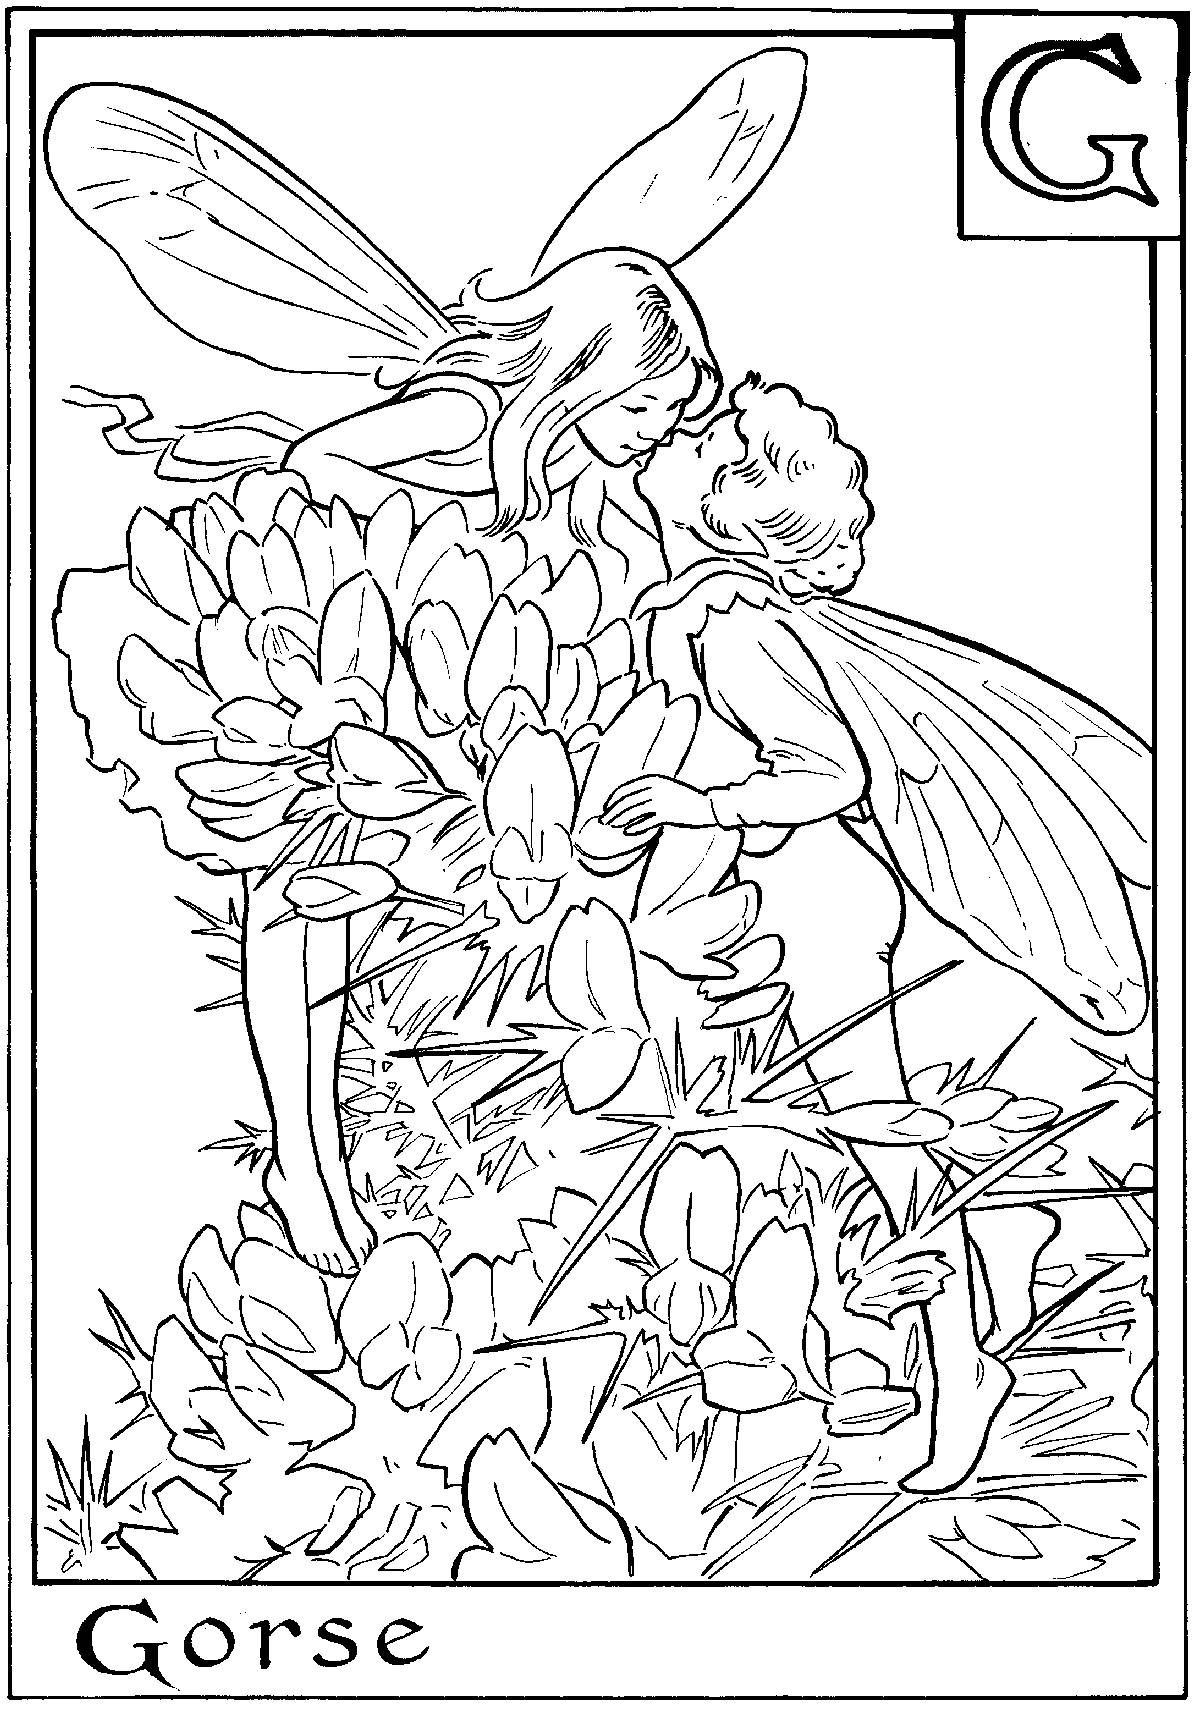 Mythical Creatures Coloring Pages For Adults
 Detailed Coloring Pages For Adults